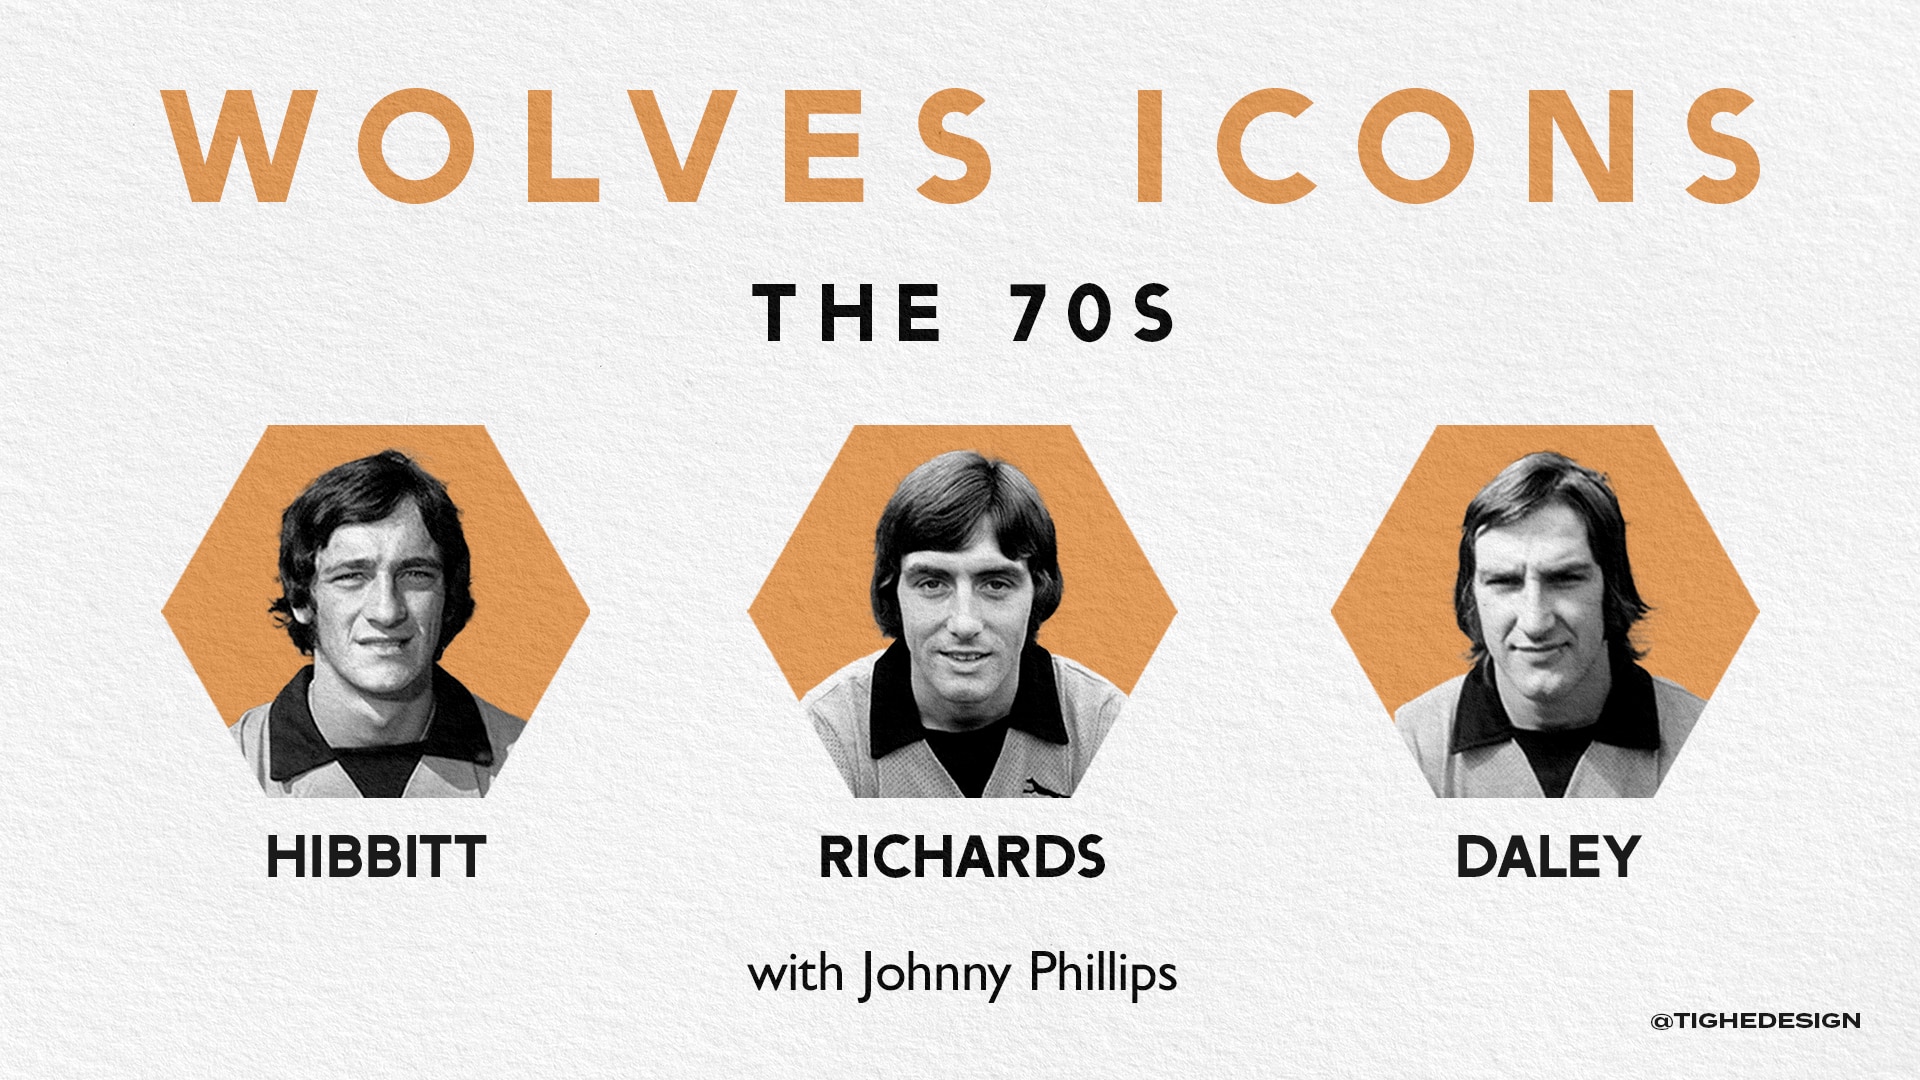 Wolves Icons- The 70s